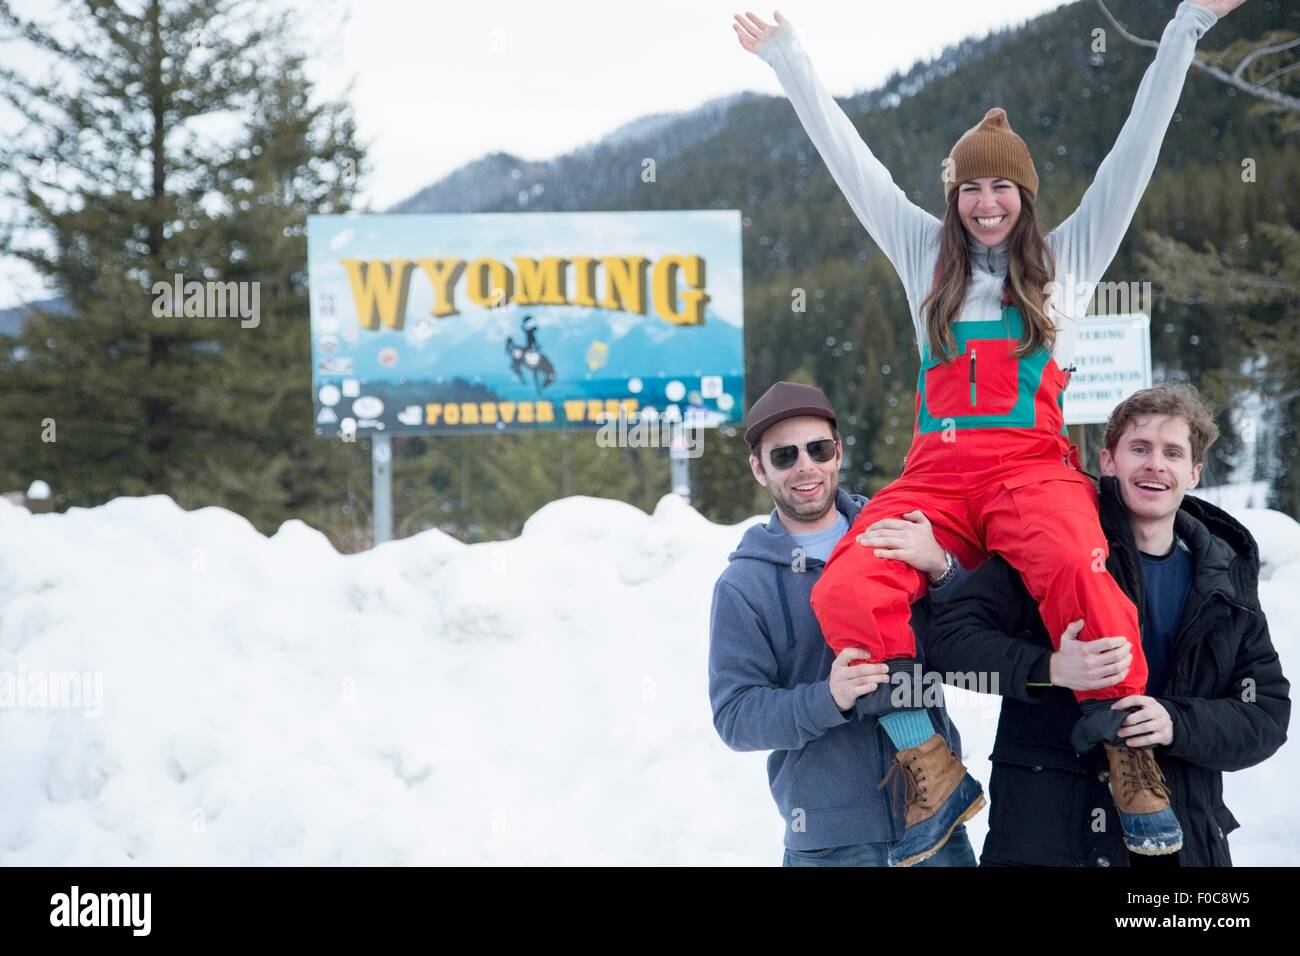 Men carrying woman on shoulder, Jackson Hole, Wyoming Stock Photo